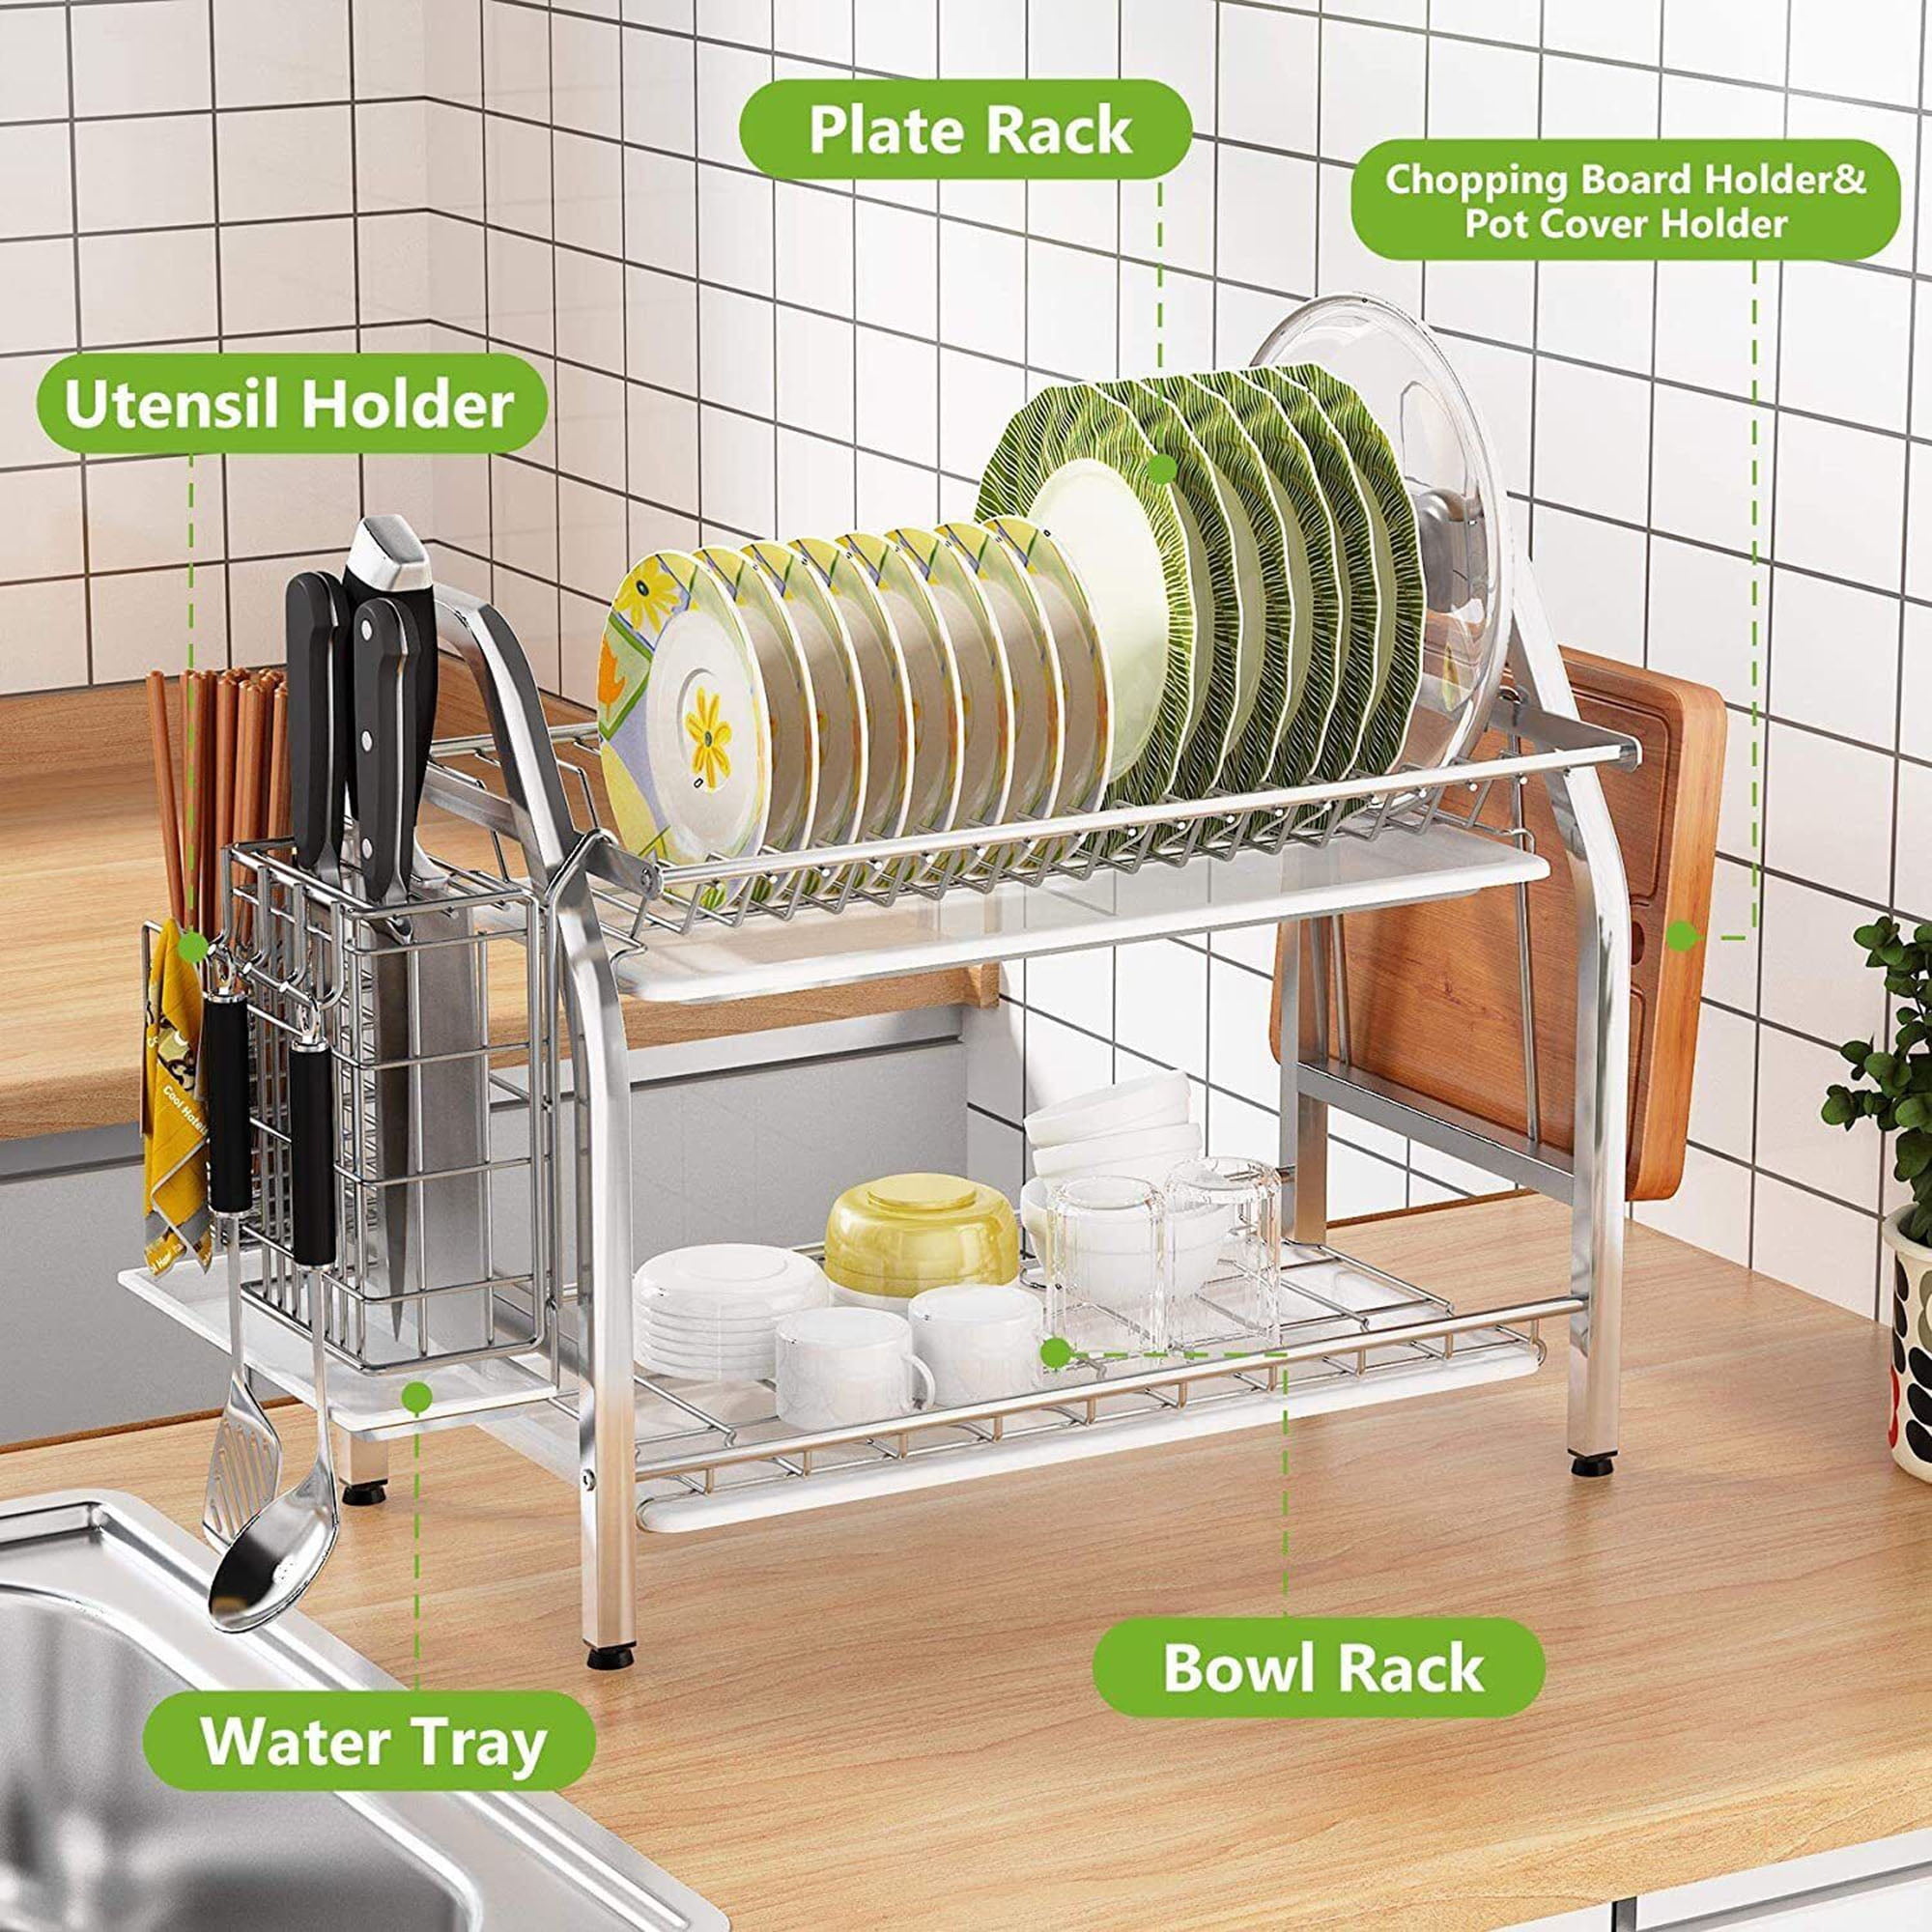 Yoneston Dish Drying Rack, 2-Tier Dish Drying Rack with Water Tray, Utensil  Holder, Cutting Board Holder for Small Space Kitchen Counter or Sink Side